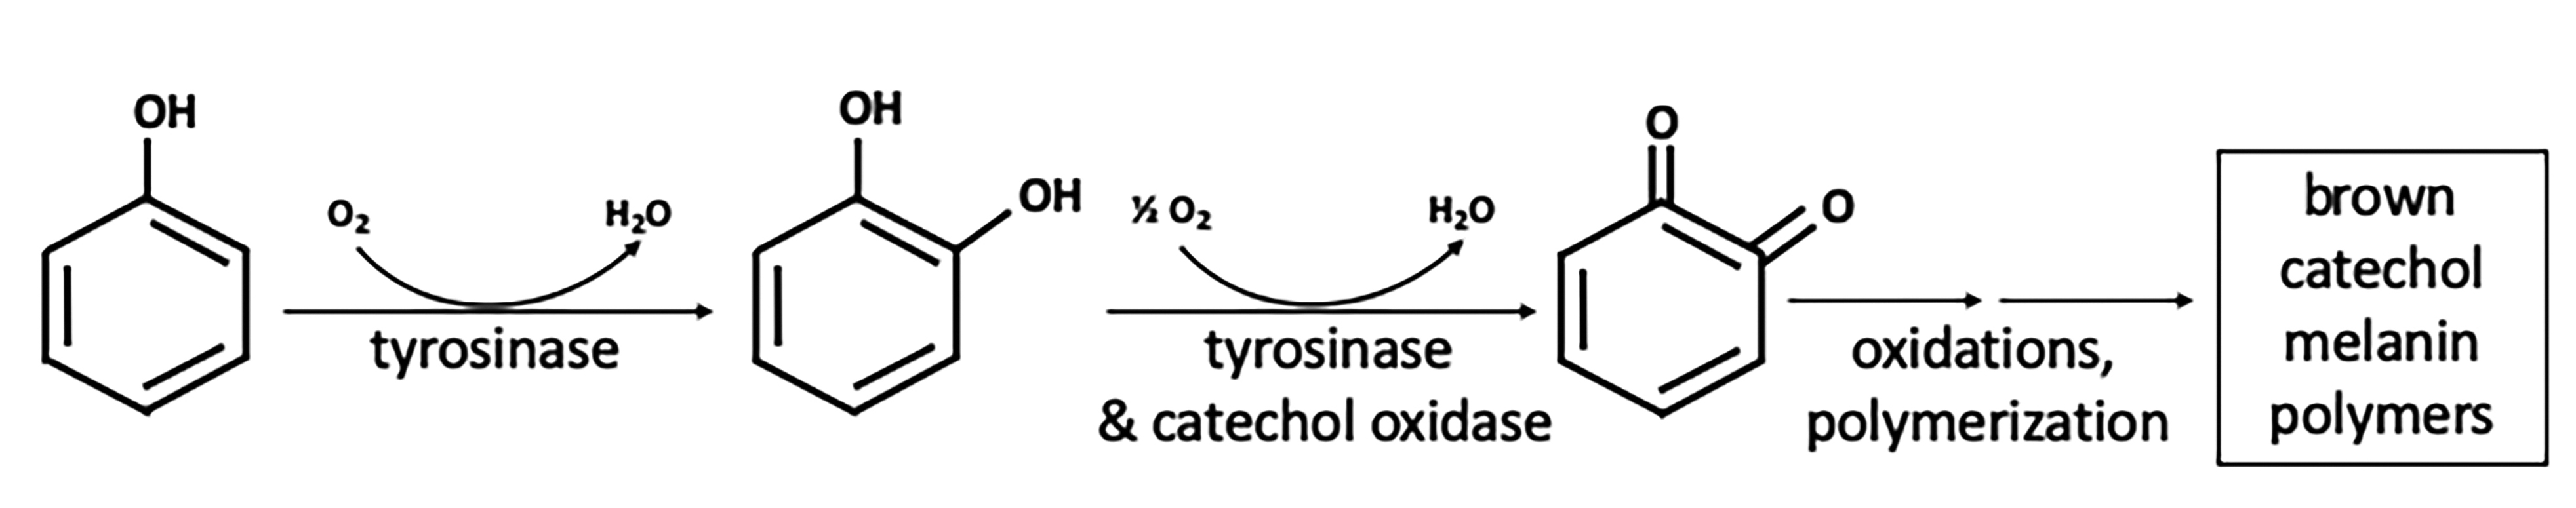 Figure 1. Reaction pathway in the browning of Hass avocado by polyphenol oxidase.